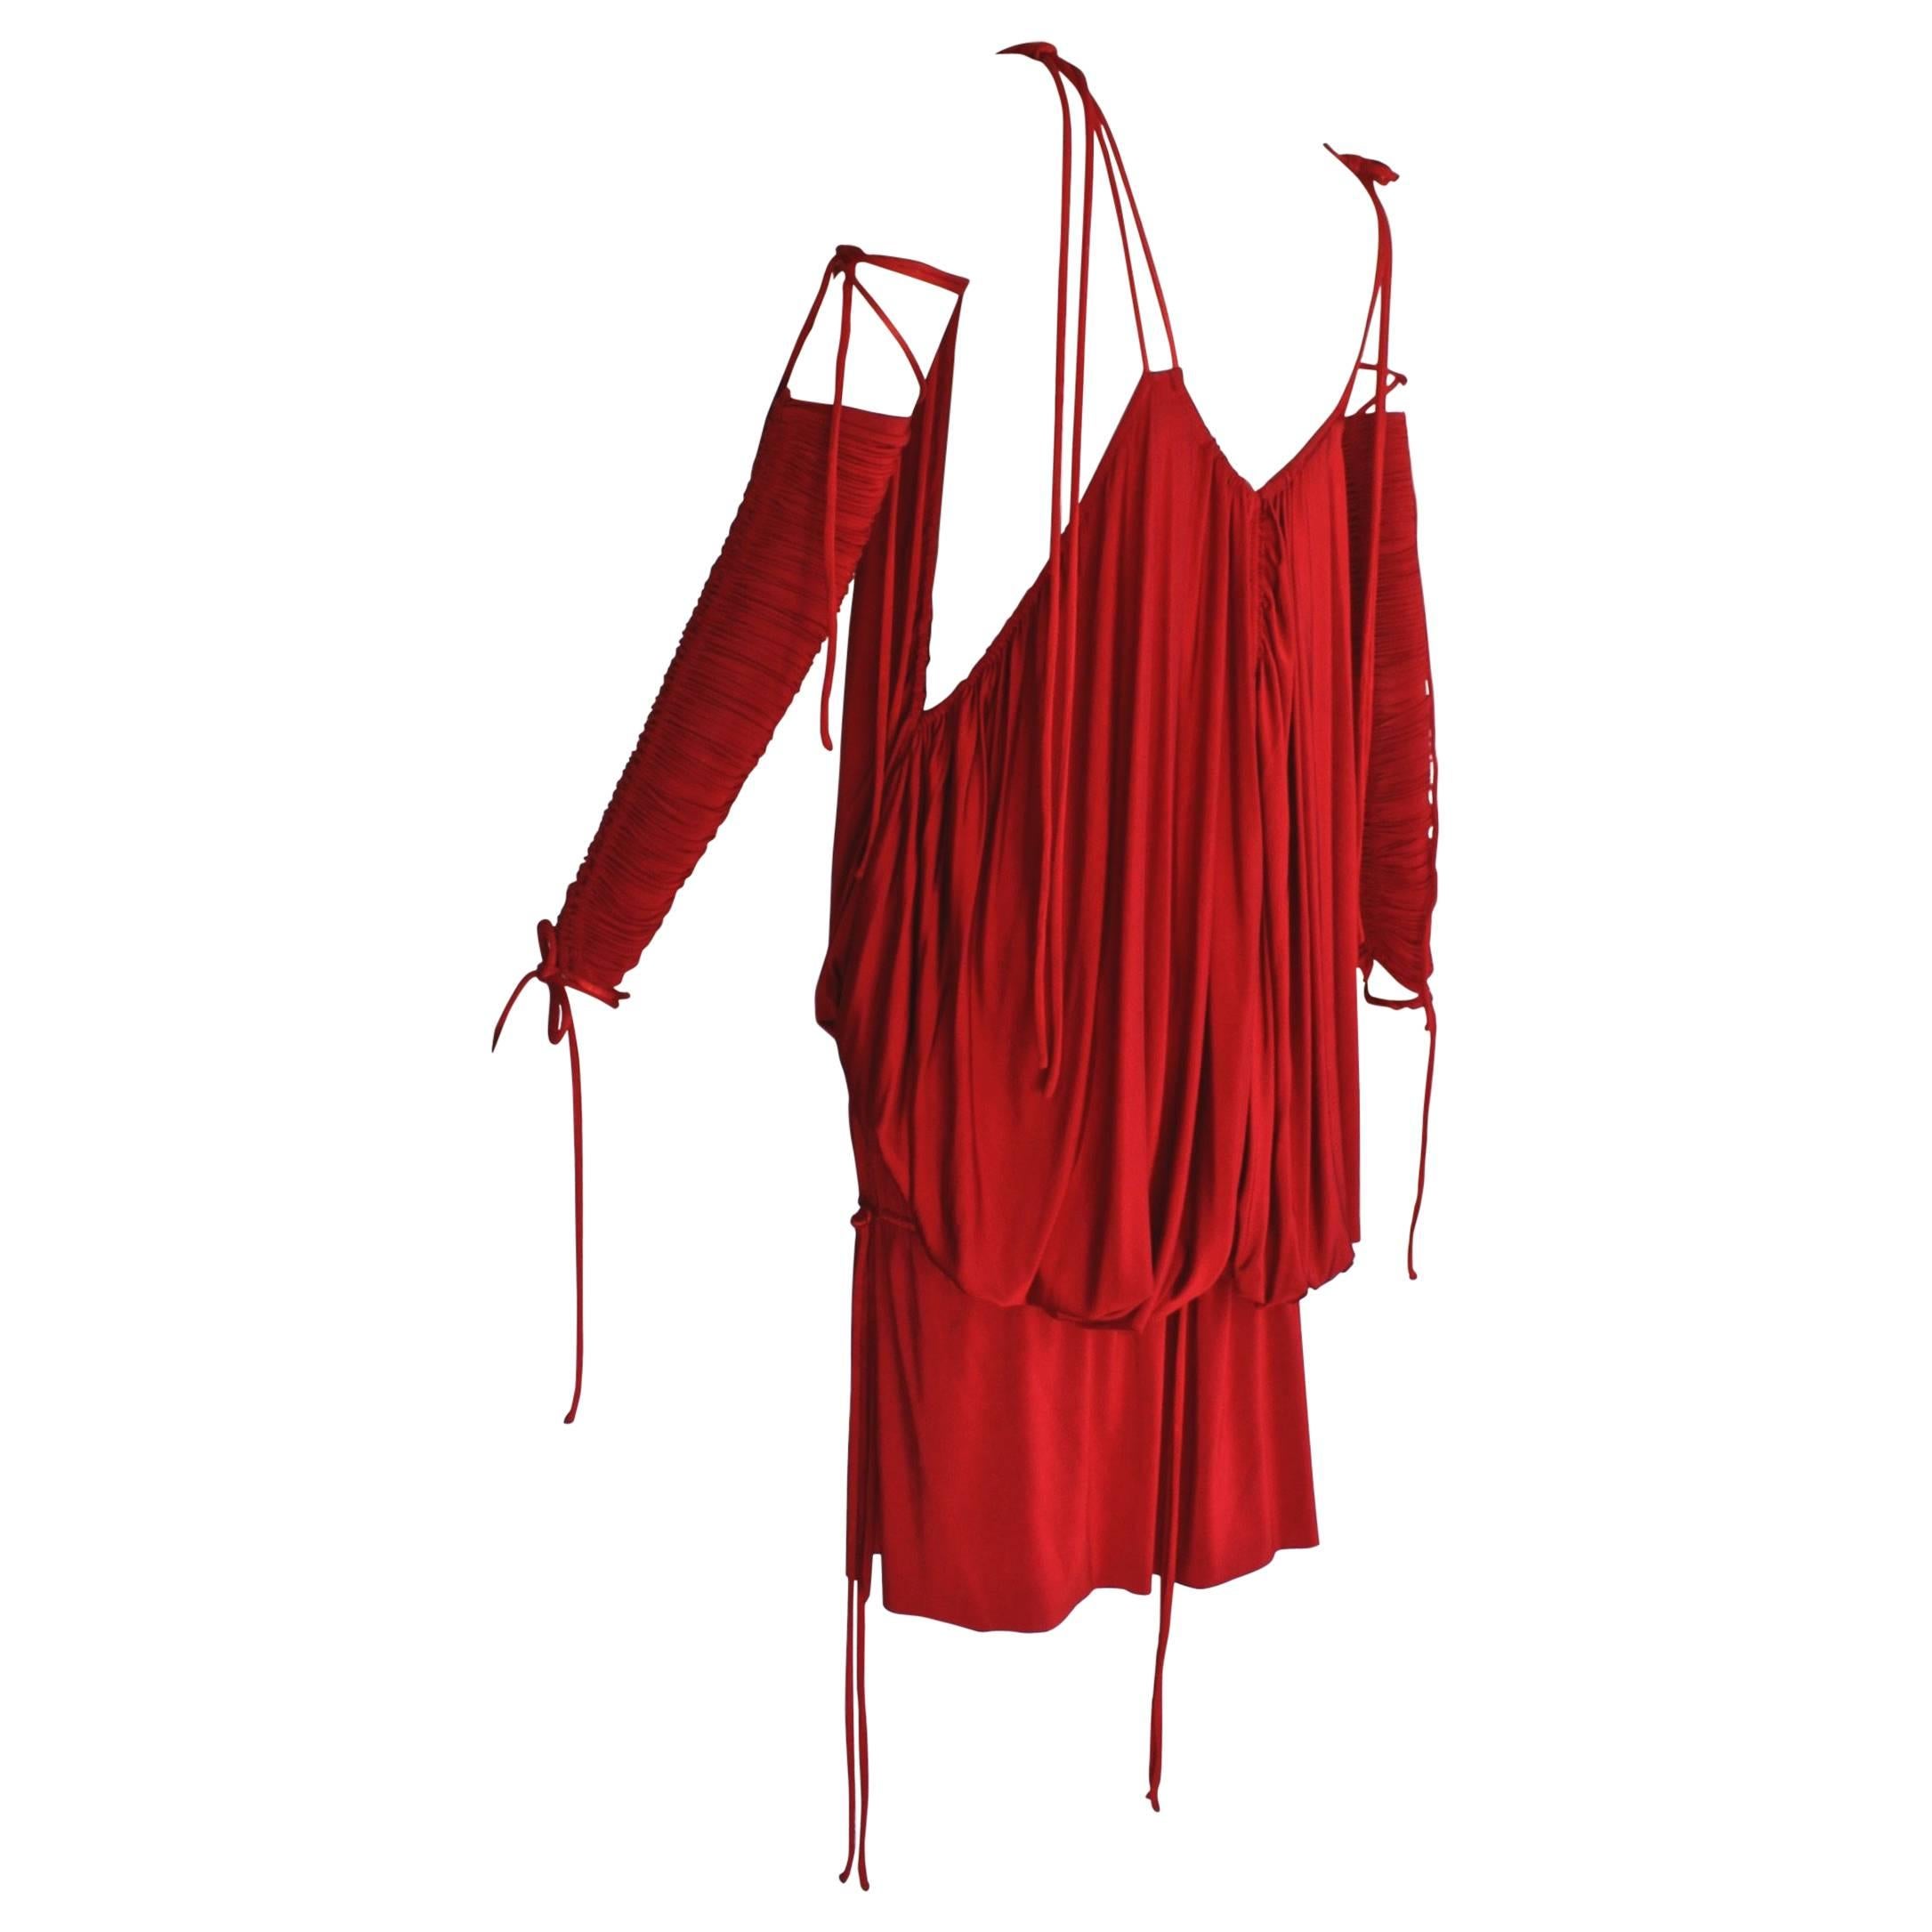 Red, baring and slinky, this Dolce & Gabbana minidress is designed to command attention. When it debuted in the spring/summer 2003 runway show on supermodel Gisele Bündchen, it led Vogue’s Sarah Mower to write, “power-womanhood is not extinct on